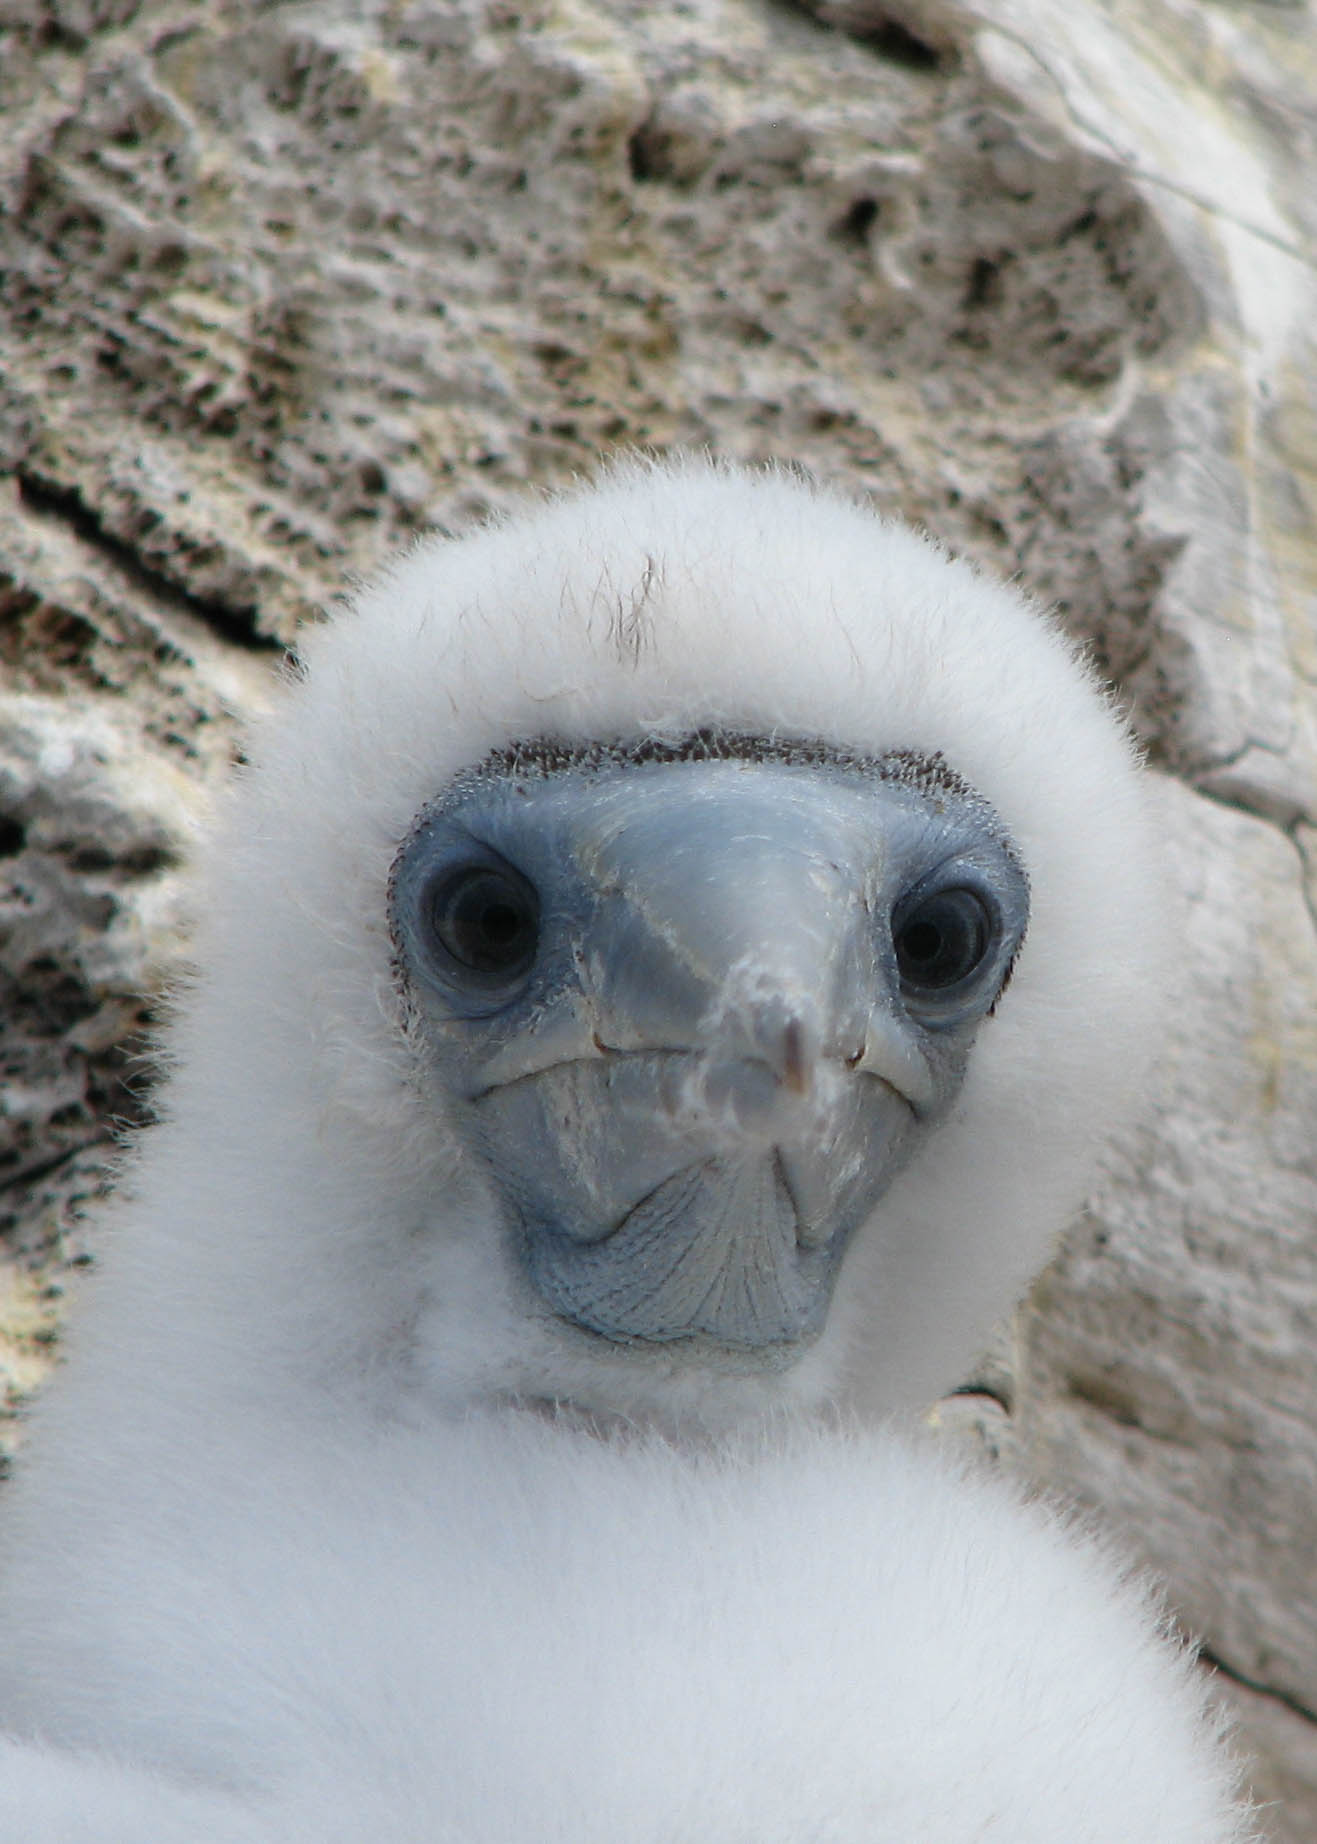 Close-up of brown booby baby looking directly at camera; all white fuzz, pale blue beak, and big eyes.